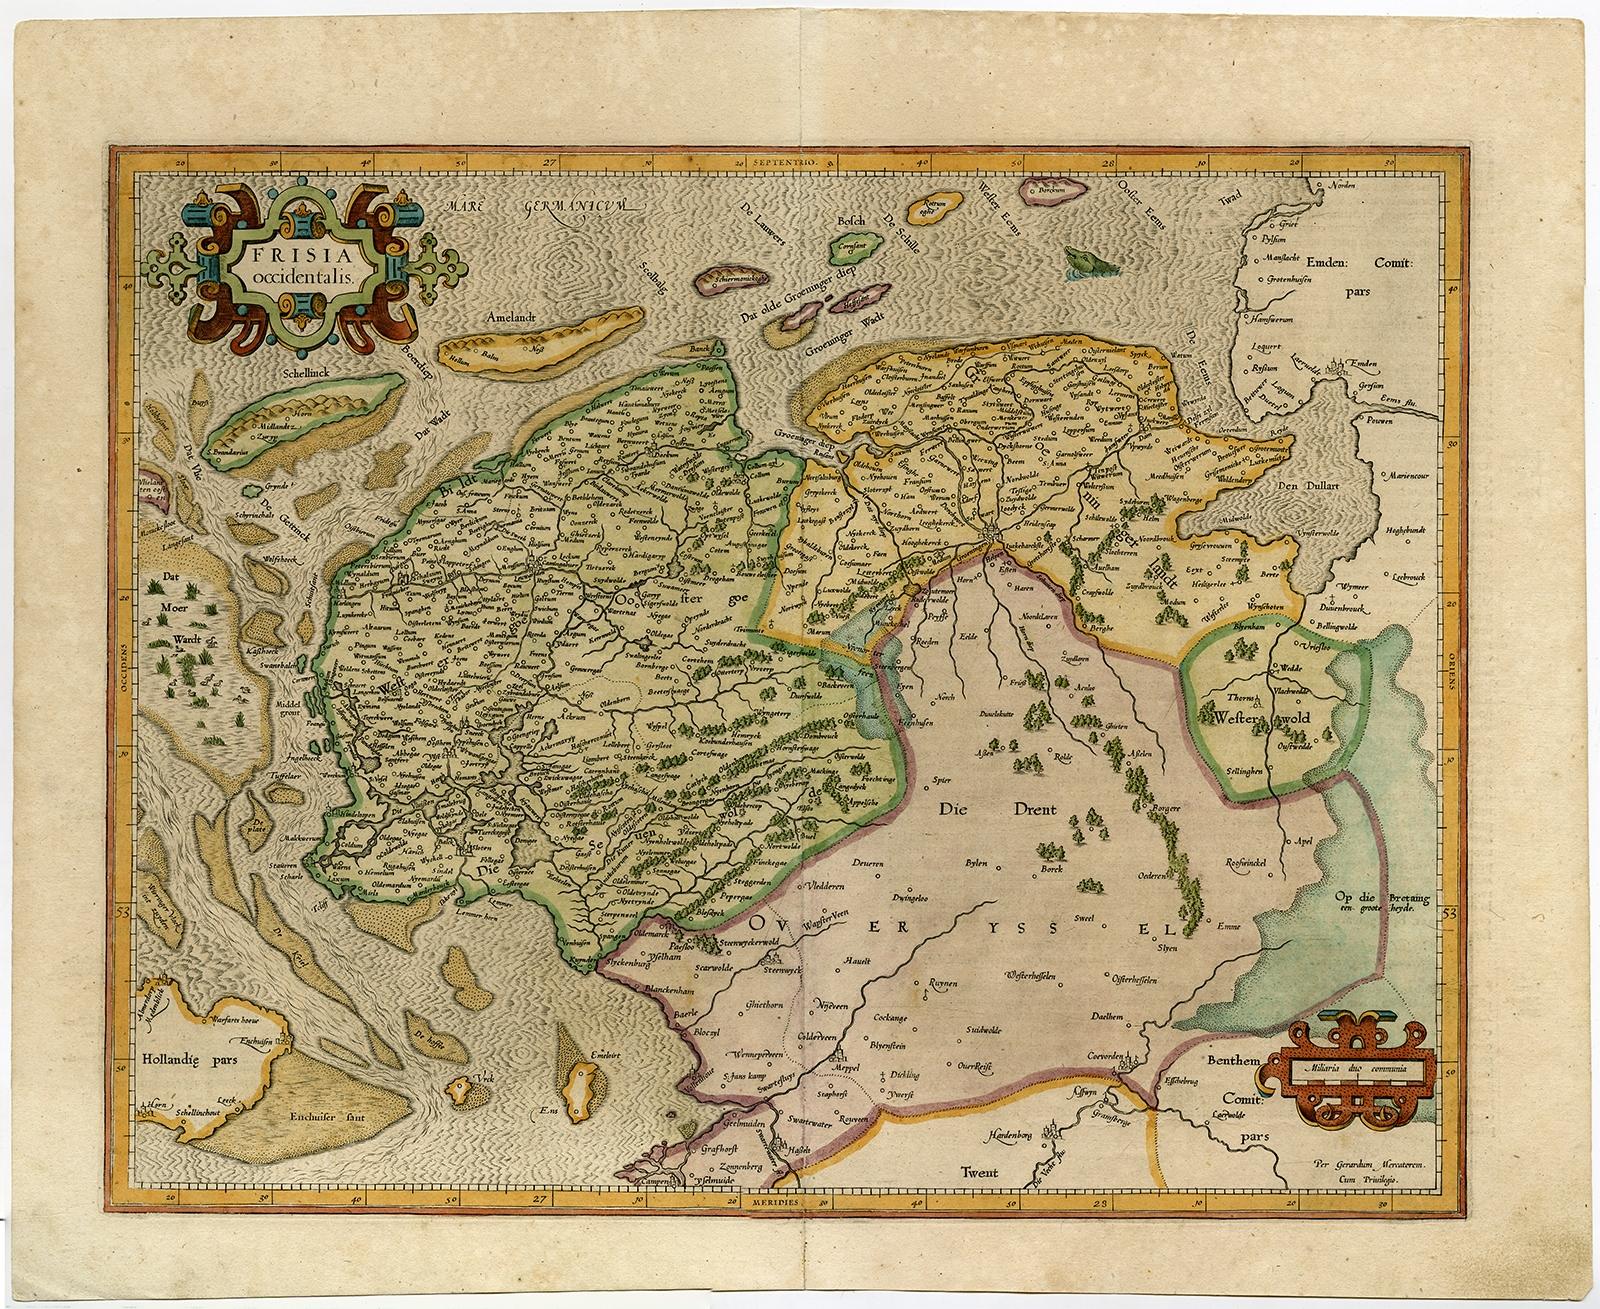 Antique print, titled: 'Frisiae Occidentalis.' 

Handsome map of the Dutch Provinces of Friesland and Groningen. Embellished with strapwork title-cartouches. Latin tekst on verso. Probably from an early ed. of 'Atlas sive cosmographicae